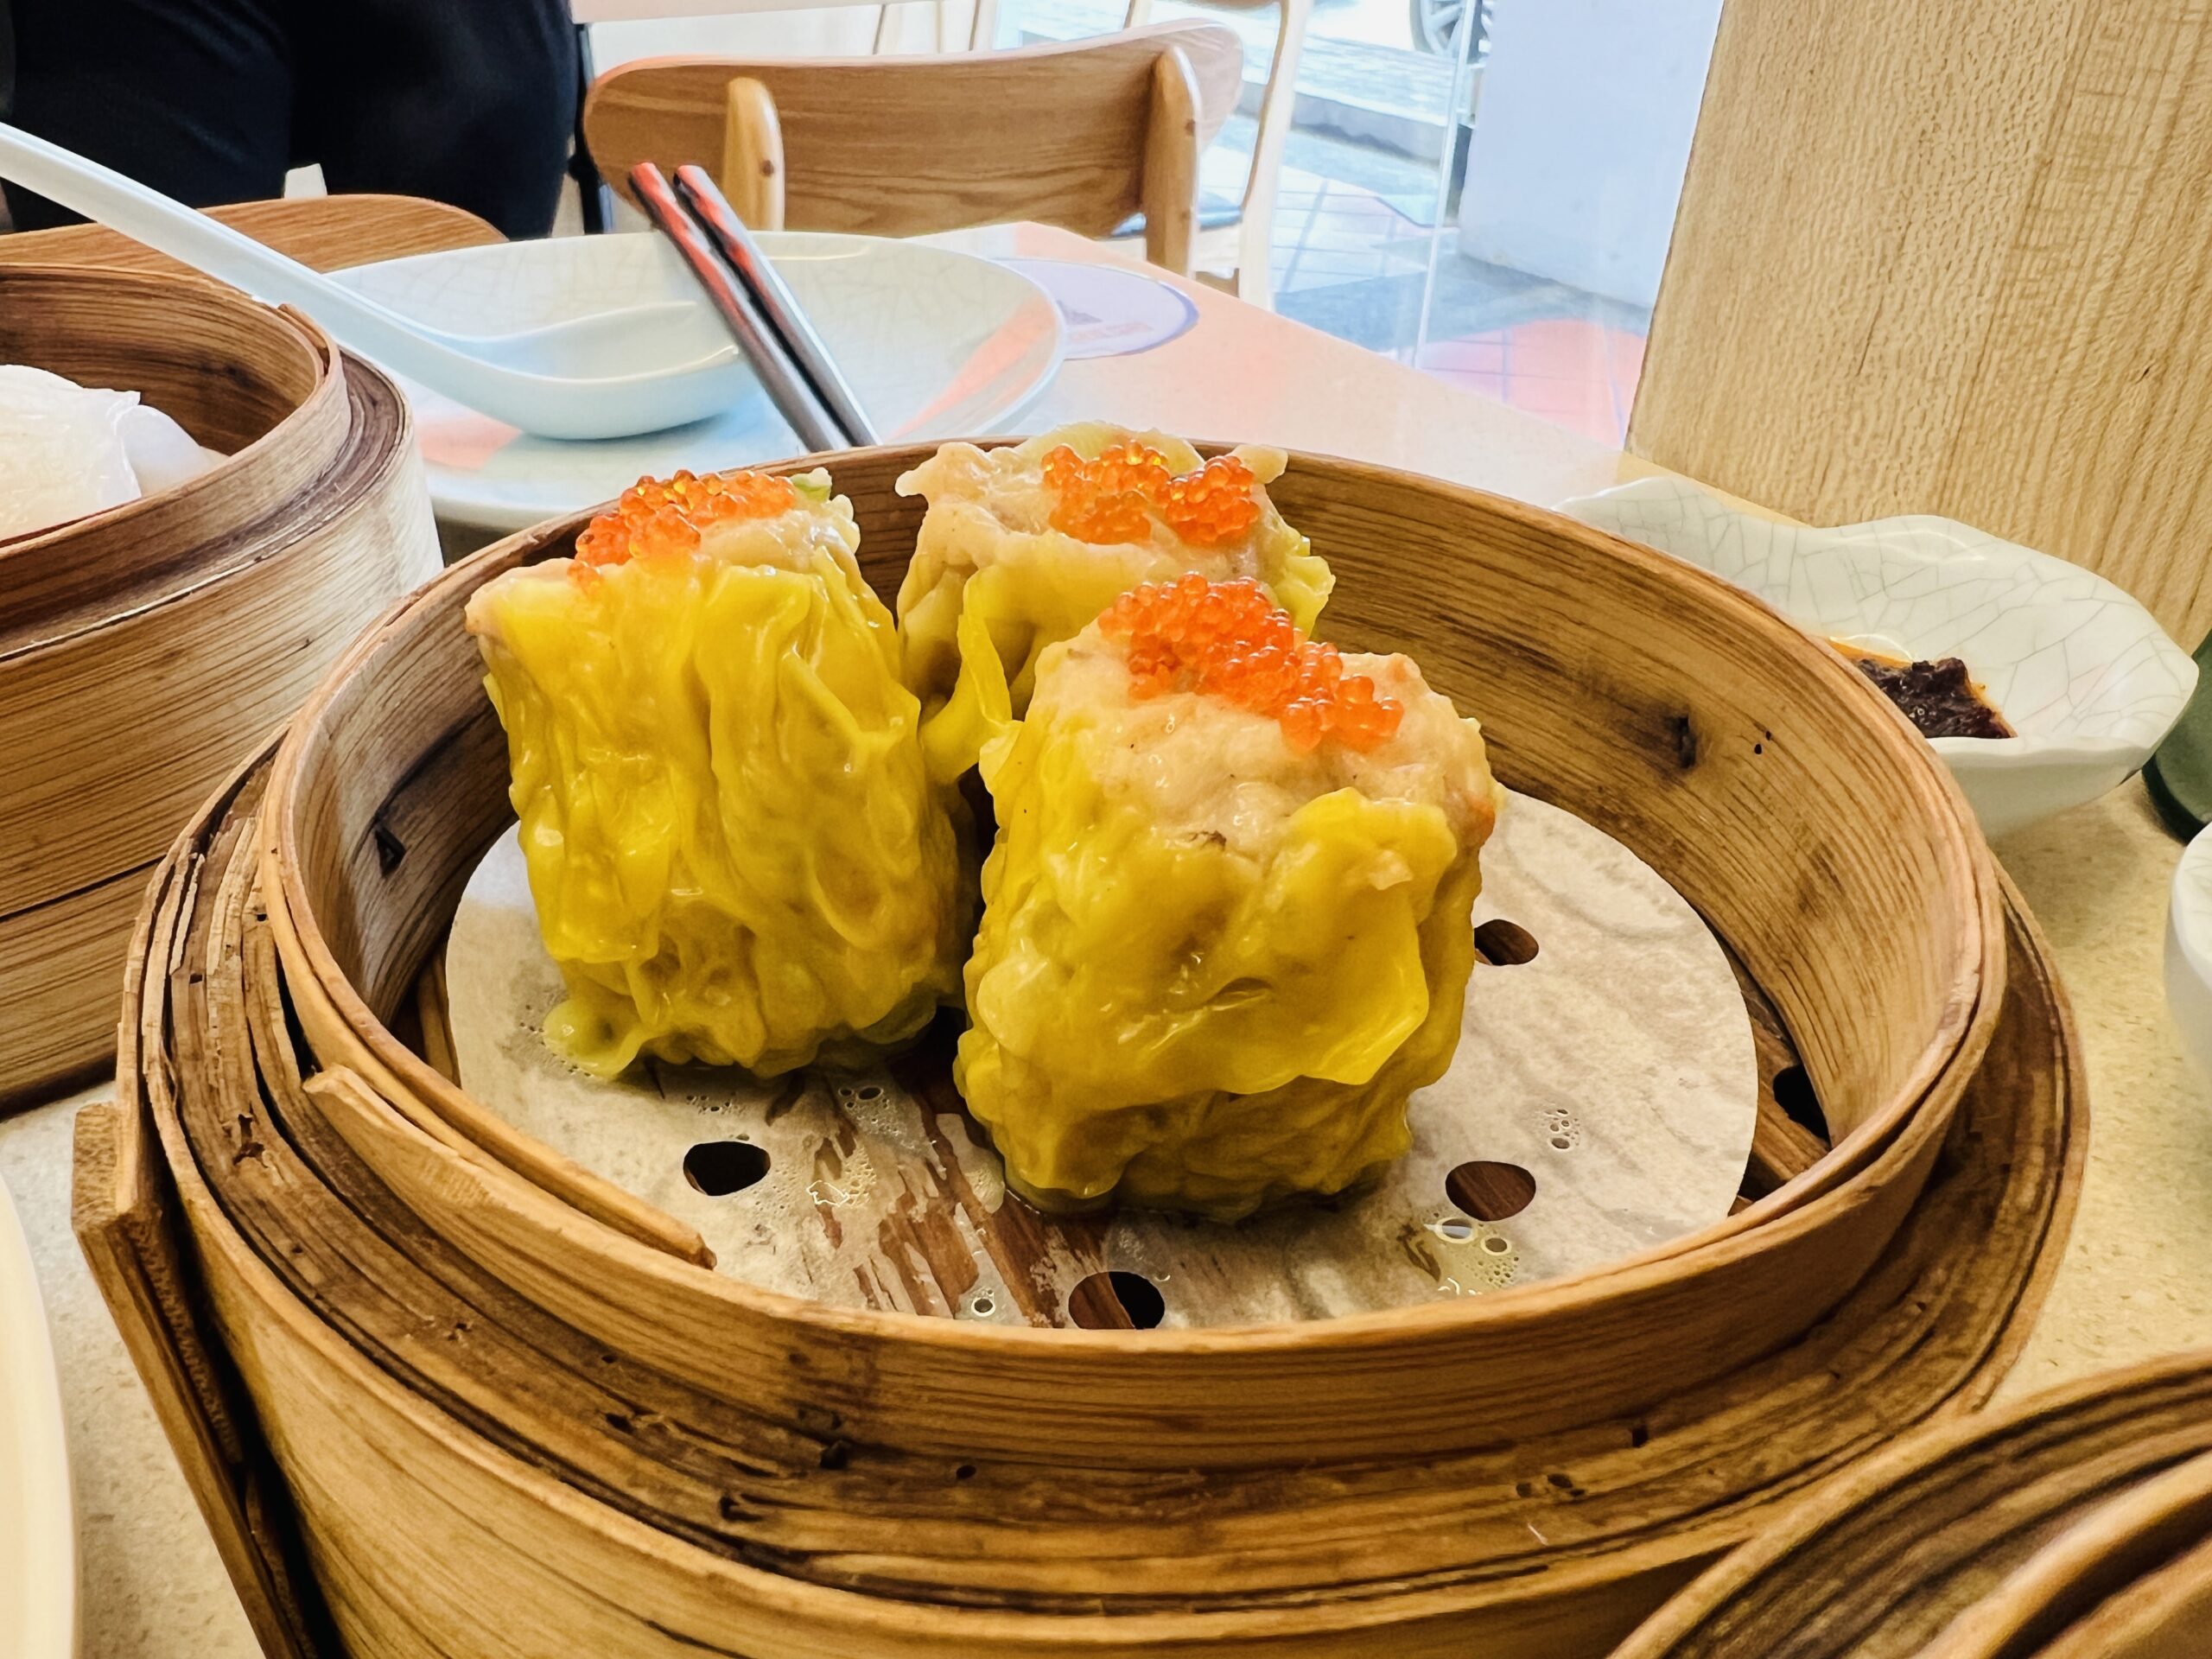 The Dim Sum Place - Chicken Siew Mai with Shrimp